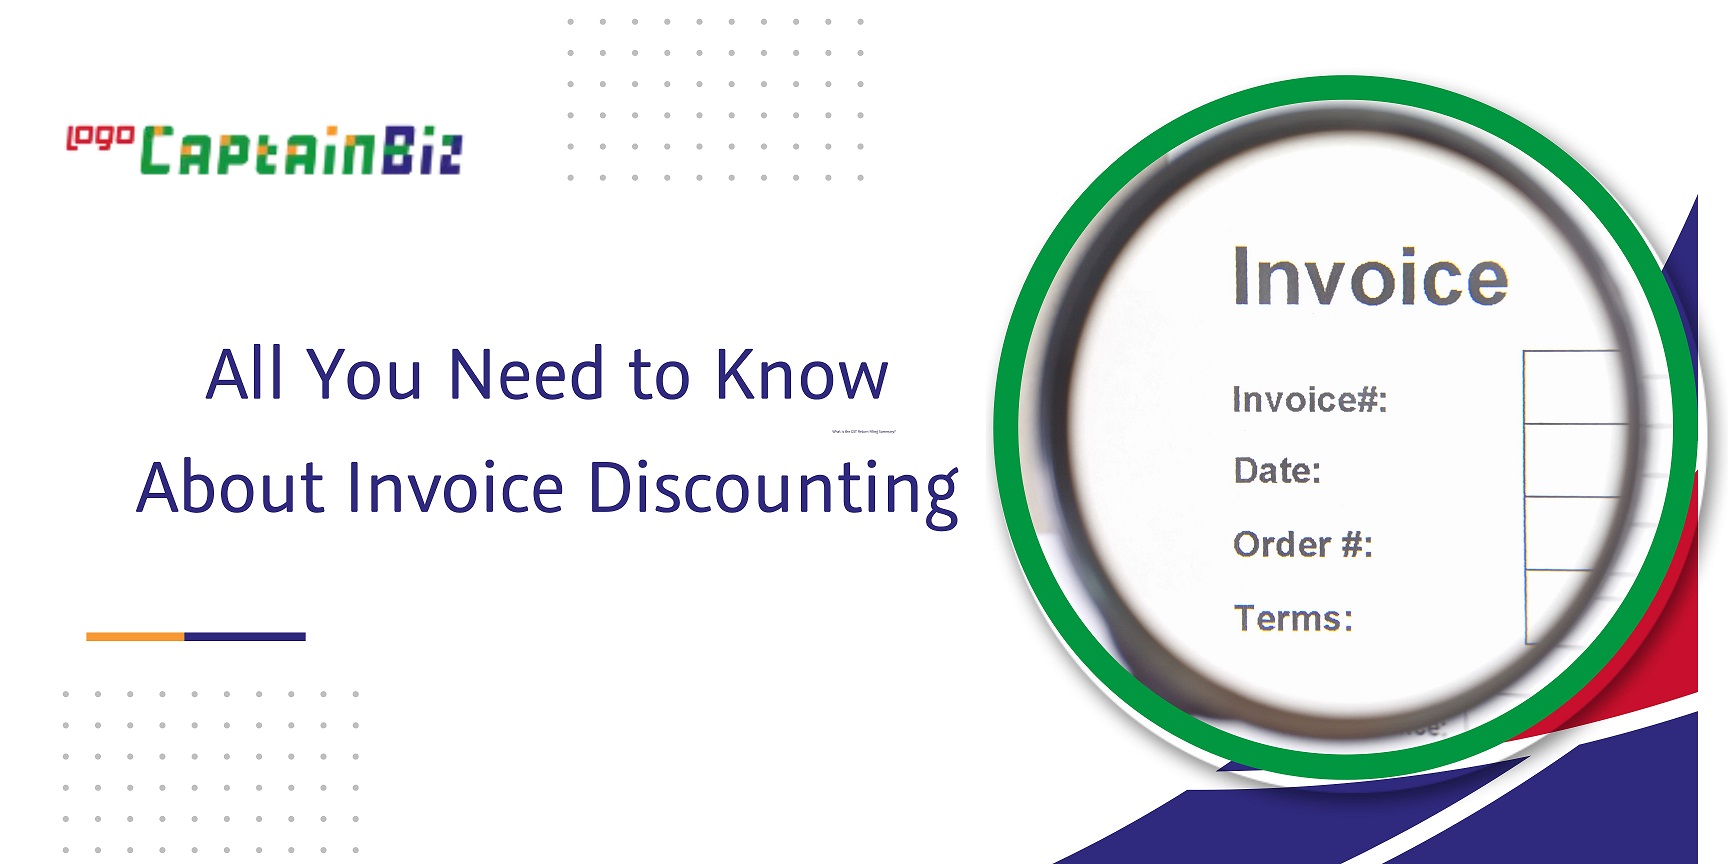 CaptainBiz: all you need to know about invoice discounting